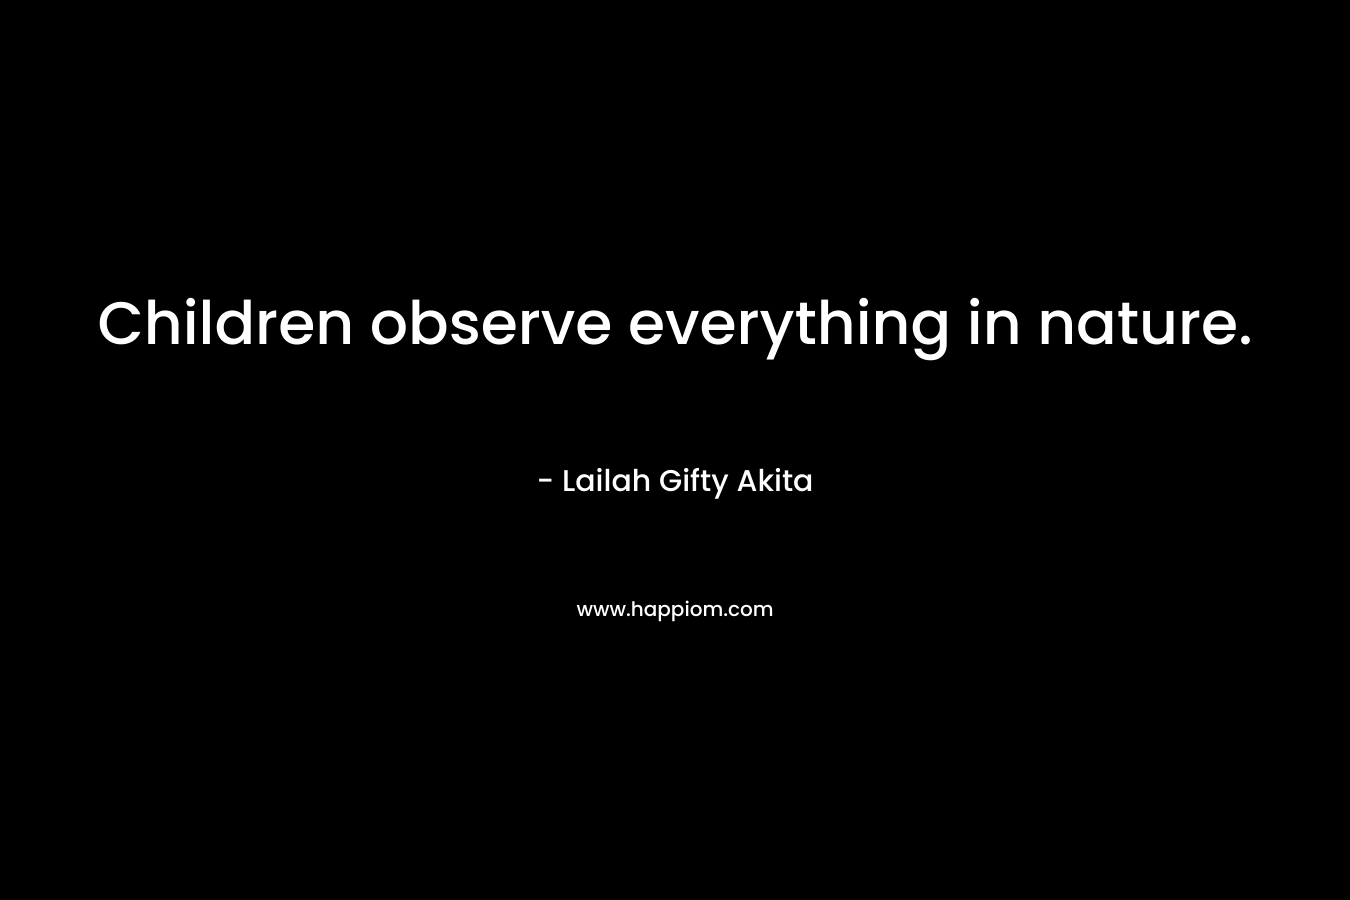 Children observe everything in nature.